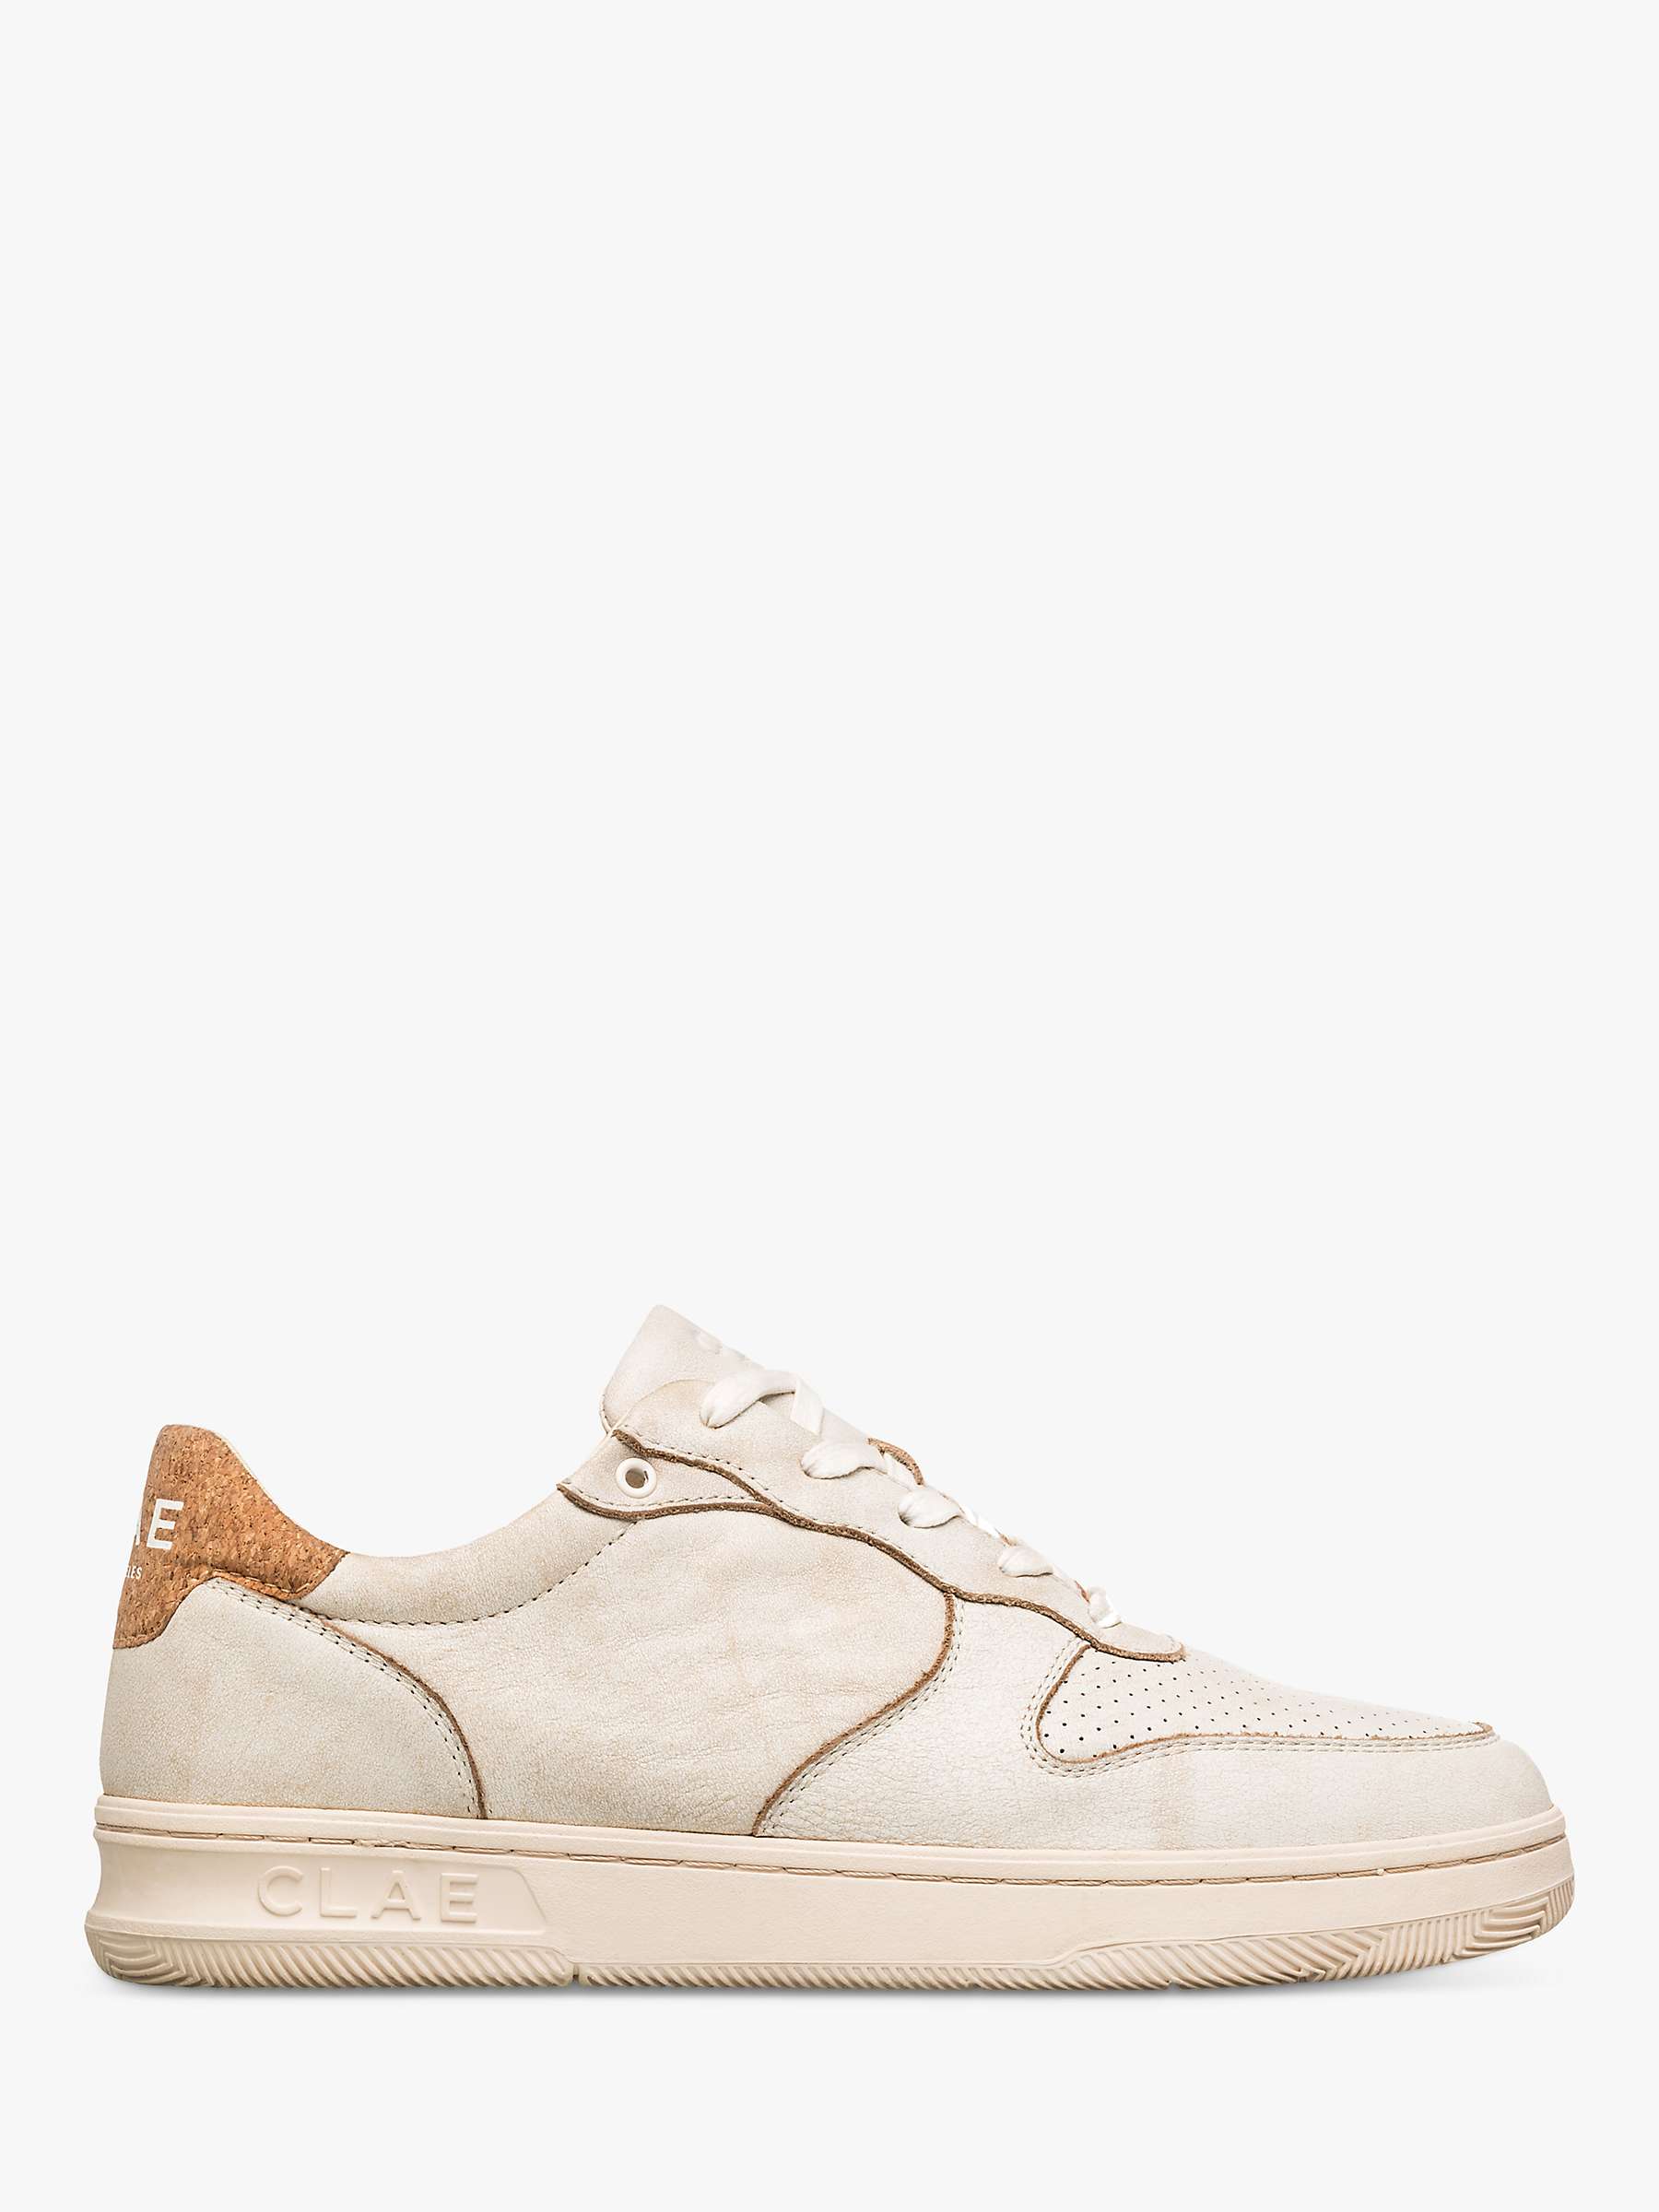 Buy CLAE Malone Apple Leather Trainers Online at johnlewis.com